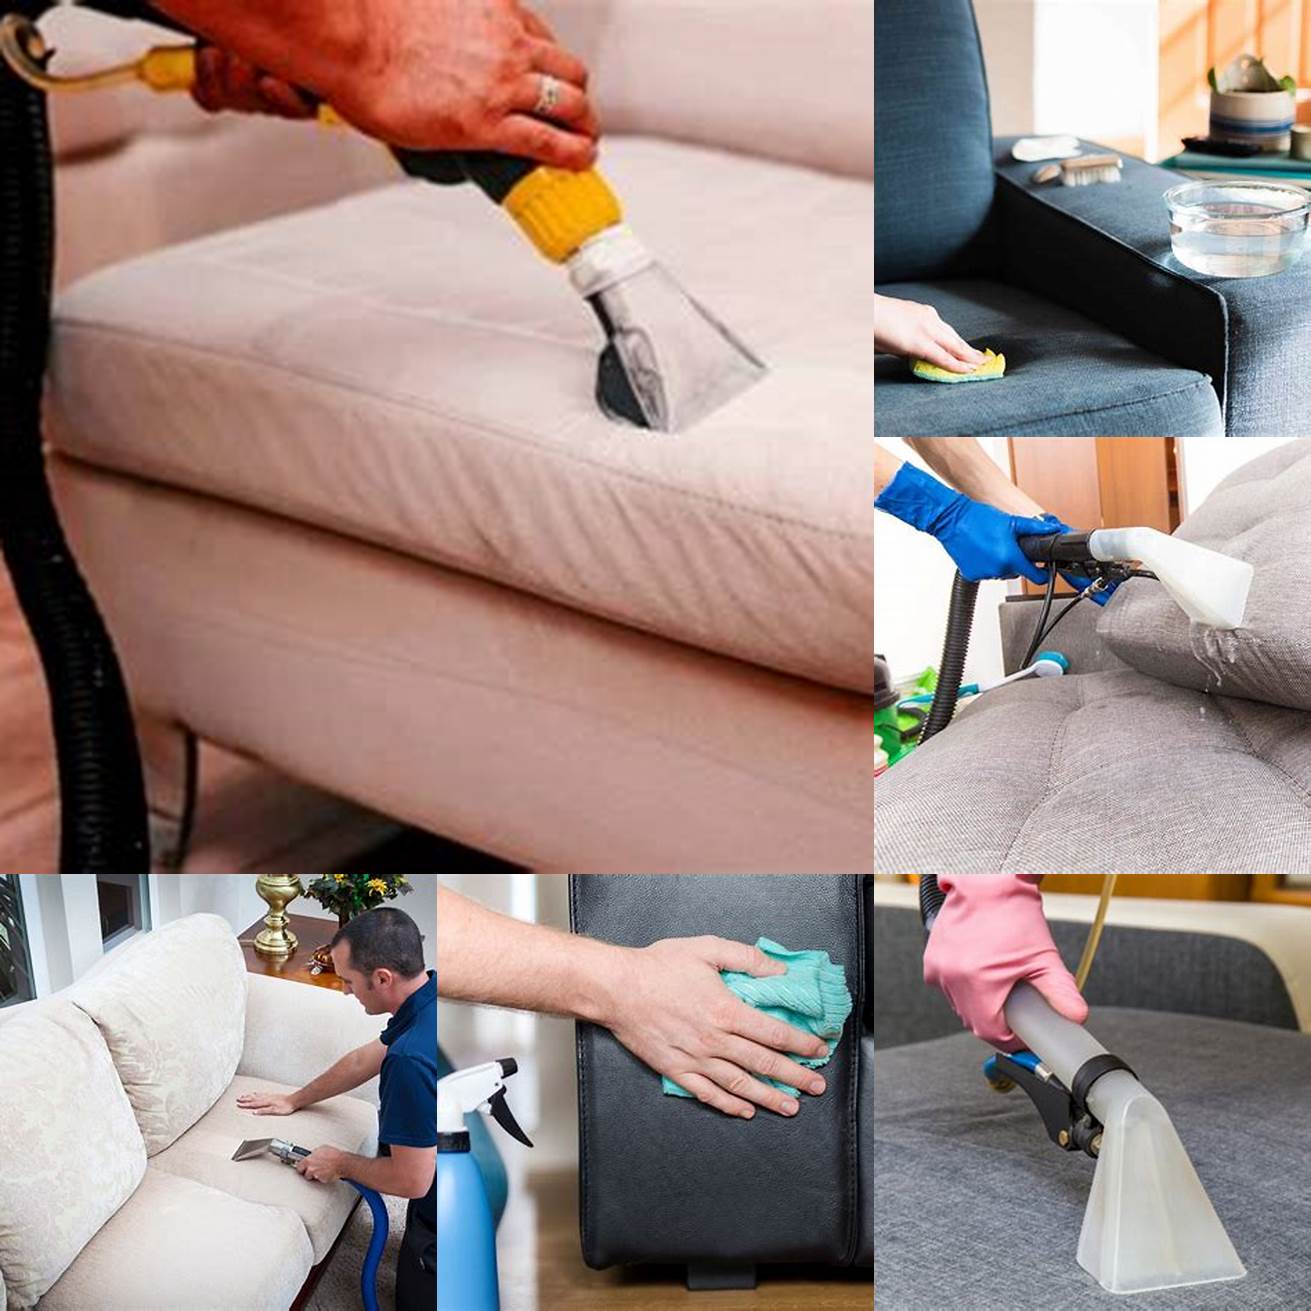 Follow the manufacturers instructions for cleaning and maintaining your specific type of upholstery